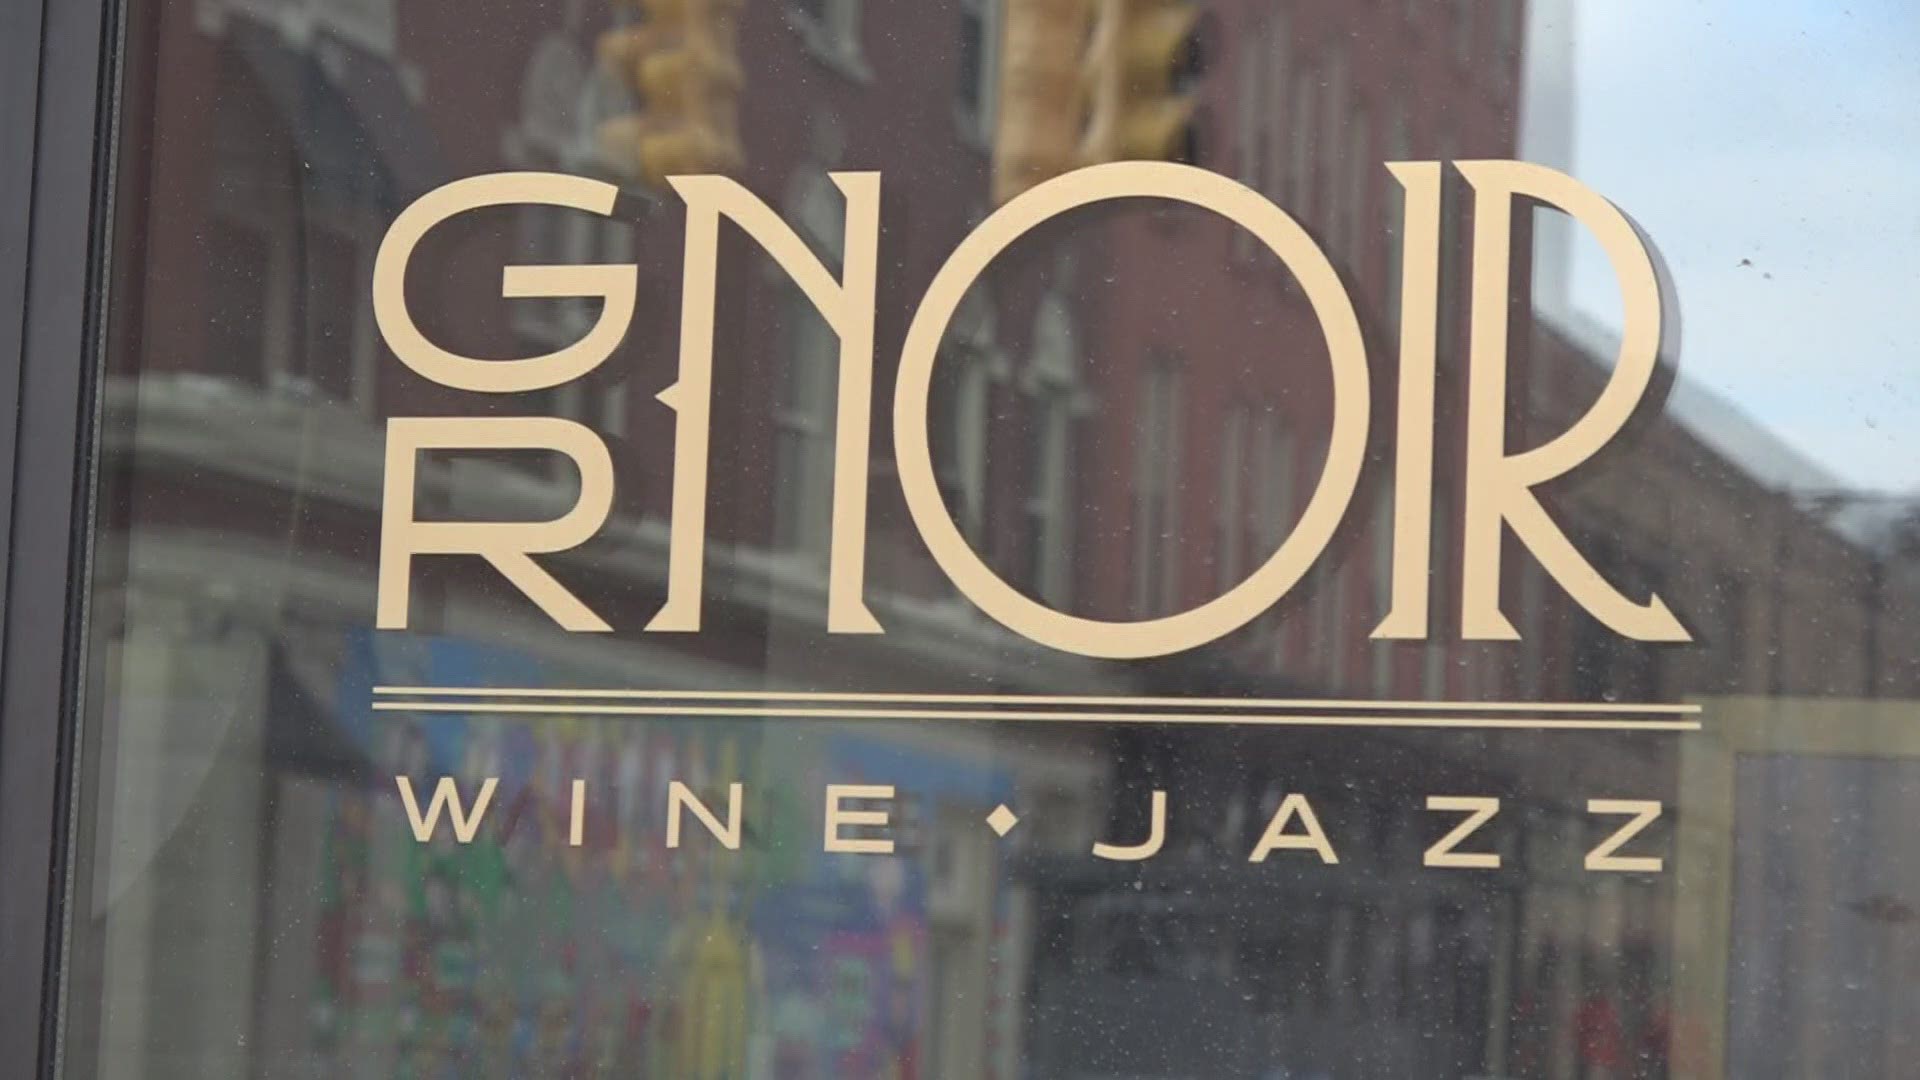 Opening during a pandemic, GRNoir offers curbside pickup for food and wine. When able to safely, it will feature live jazz music and wine tastings.